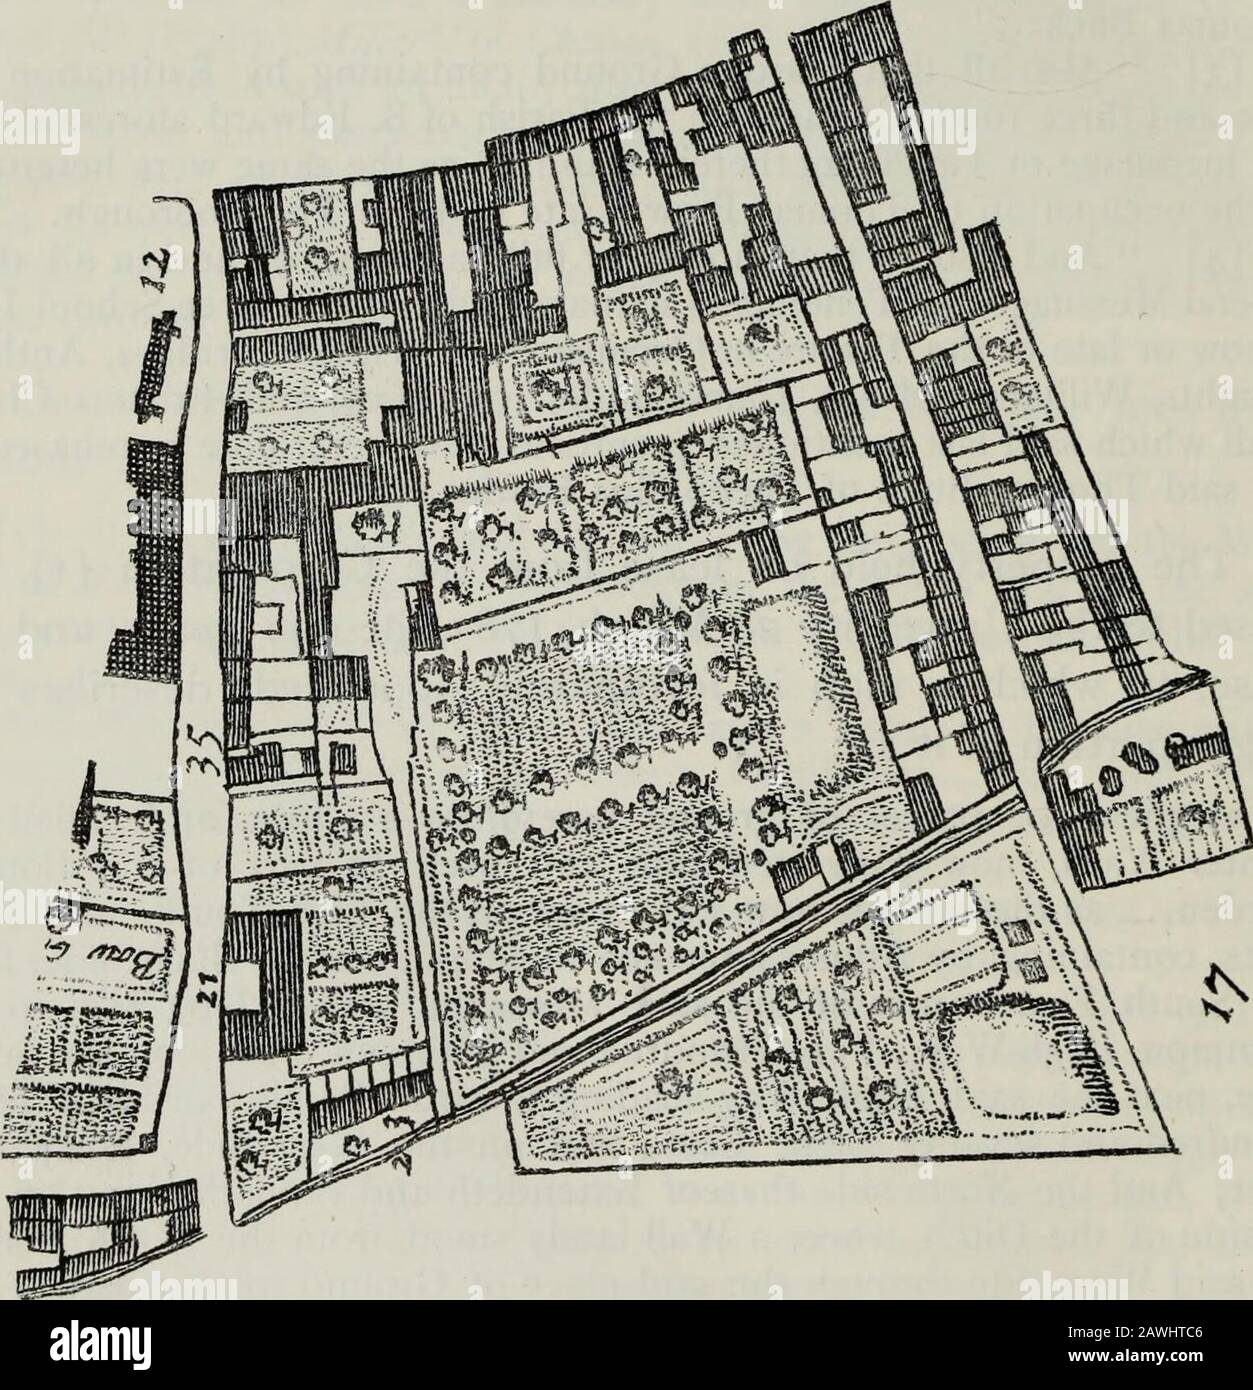 The architectural history of the University of Cambridge, and of the colleges of Cambridge and Eton . that part of thesame Ditch which is opposite to the South West Corner of the Gardenbelonging to the said Messuage..., And from the outside of the saidDitch at that Place to the said South West Corner of the said Garden,and from thence along by the South side of the said Garden, and SouthEnd of the said Messuage or Tenement, to the North End of theEast Wall next Fair Yard Lane aforesaid. This description, though the measurements cannot be ex-actly fitted to the ground in its present state, enab Stock Photo